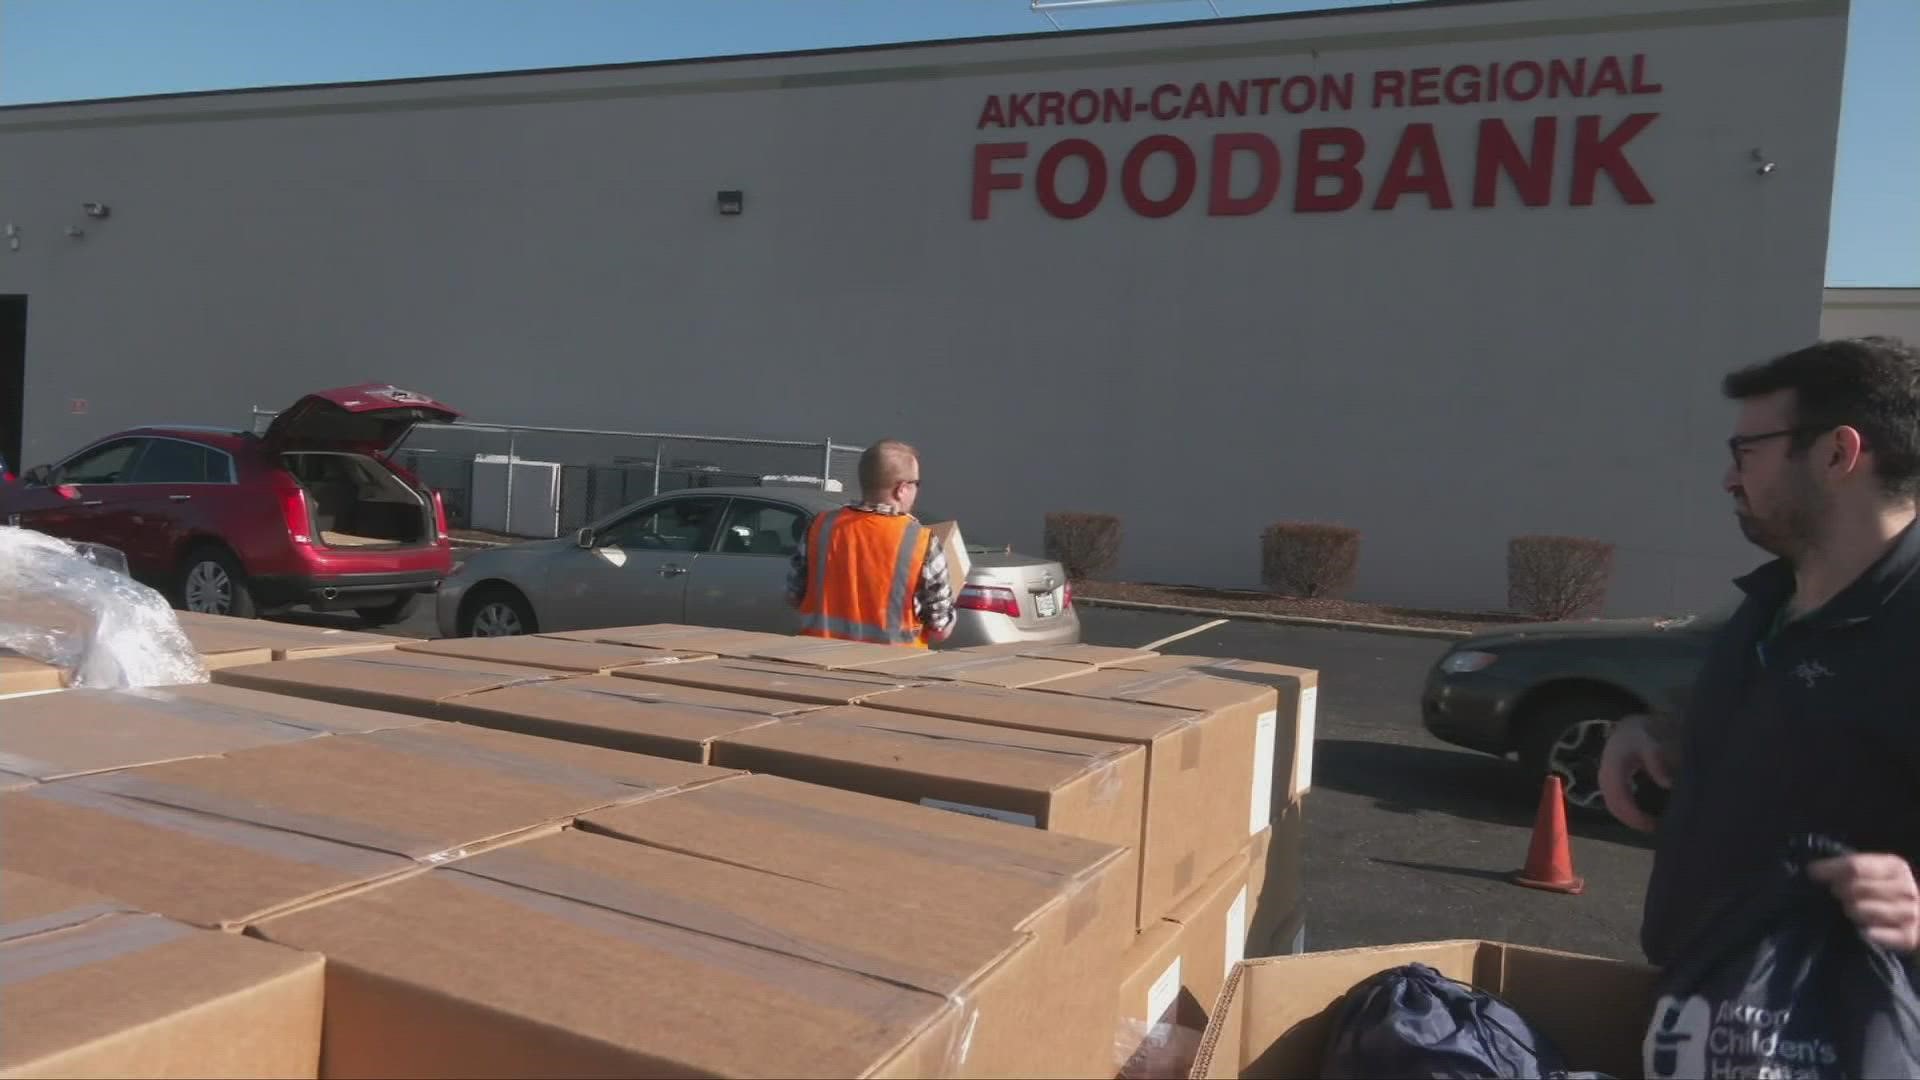 Kierra speaks with Raven Gayheart of the Akron Canton Regional Foodbank about their current drive.